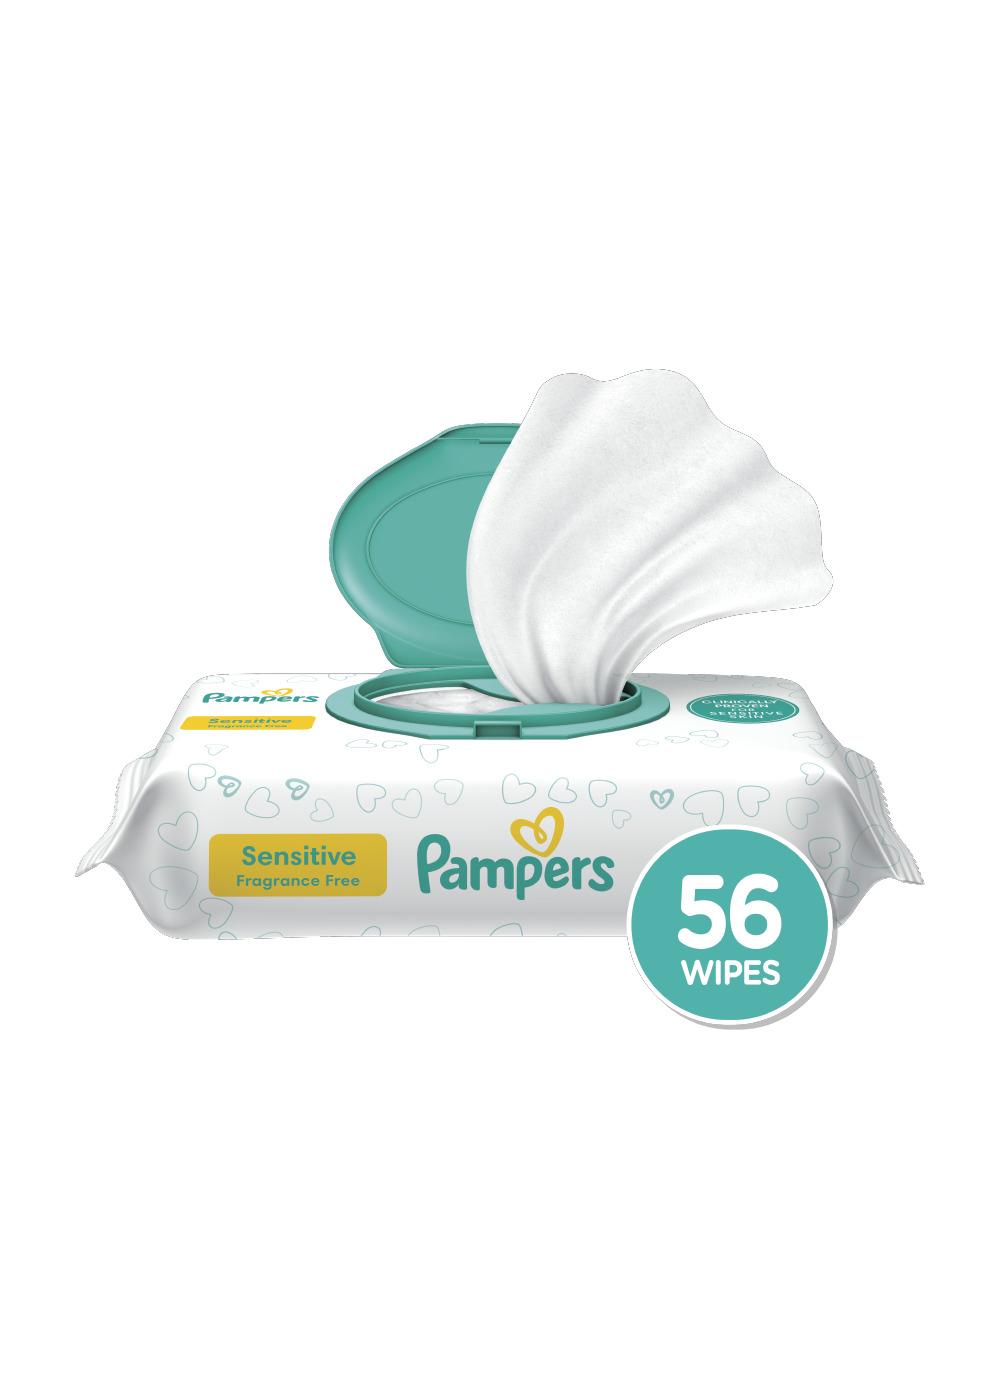 Pampers Baby Wipes - Sensitive Skin; image 8 of 9